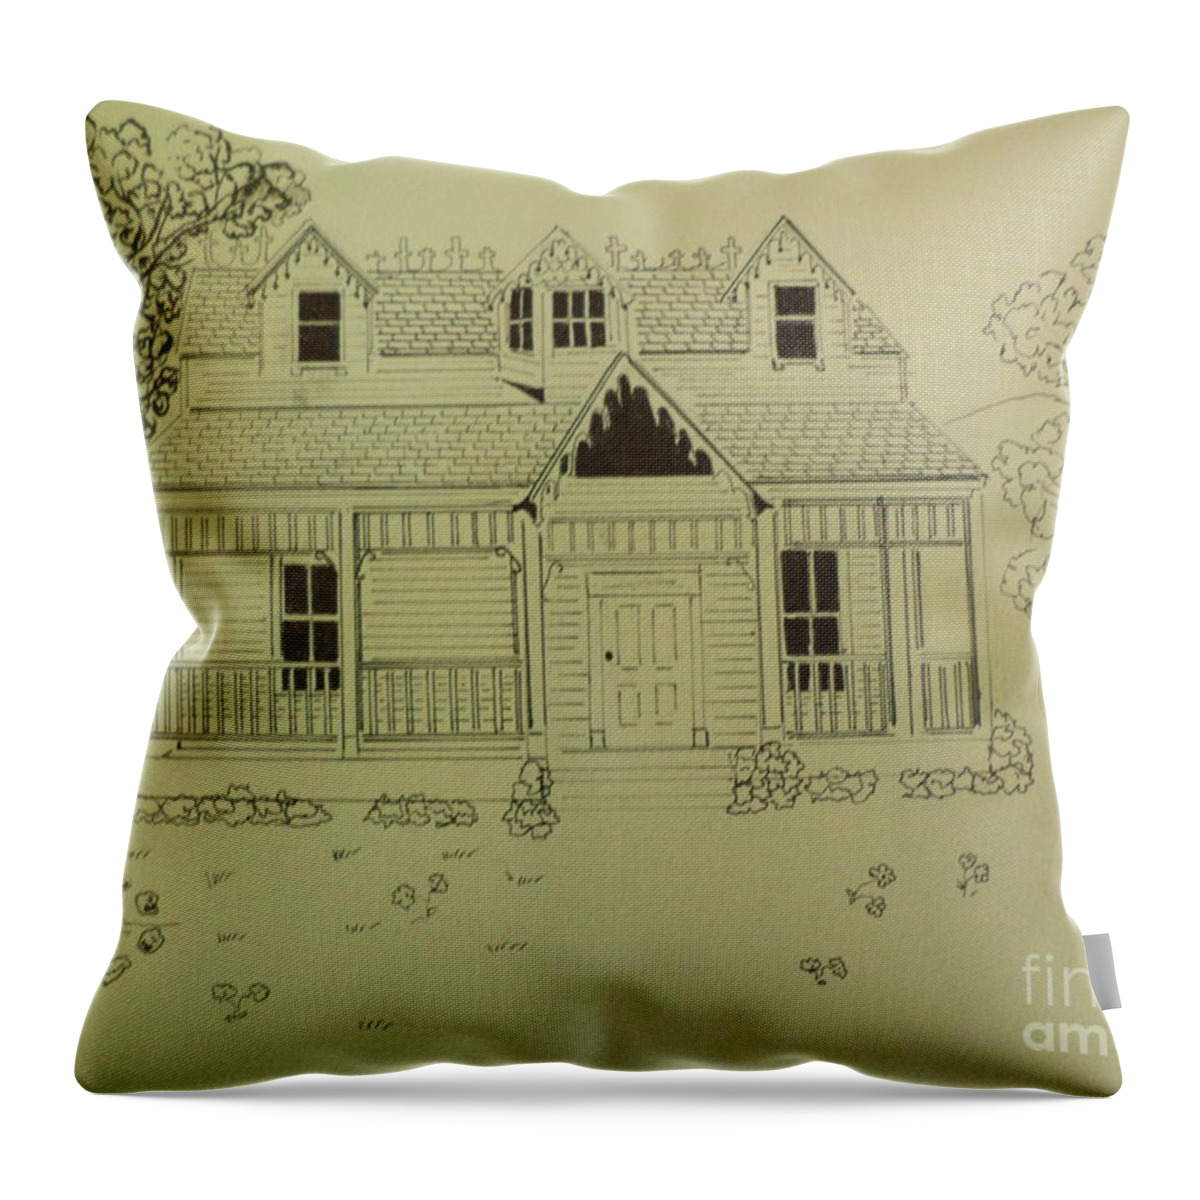  Throw Pillow featuring the drawing Annabell Movie Ink Drawing by Donald Northup